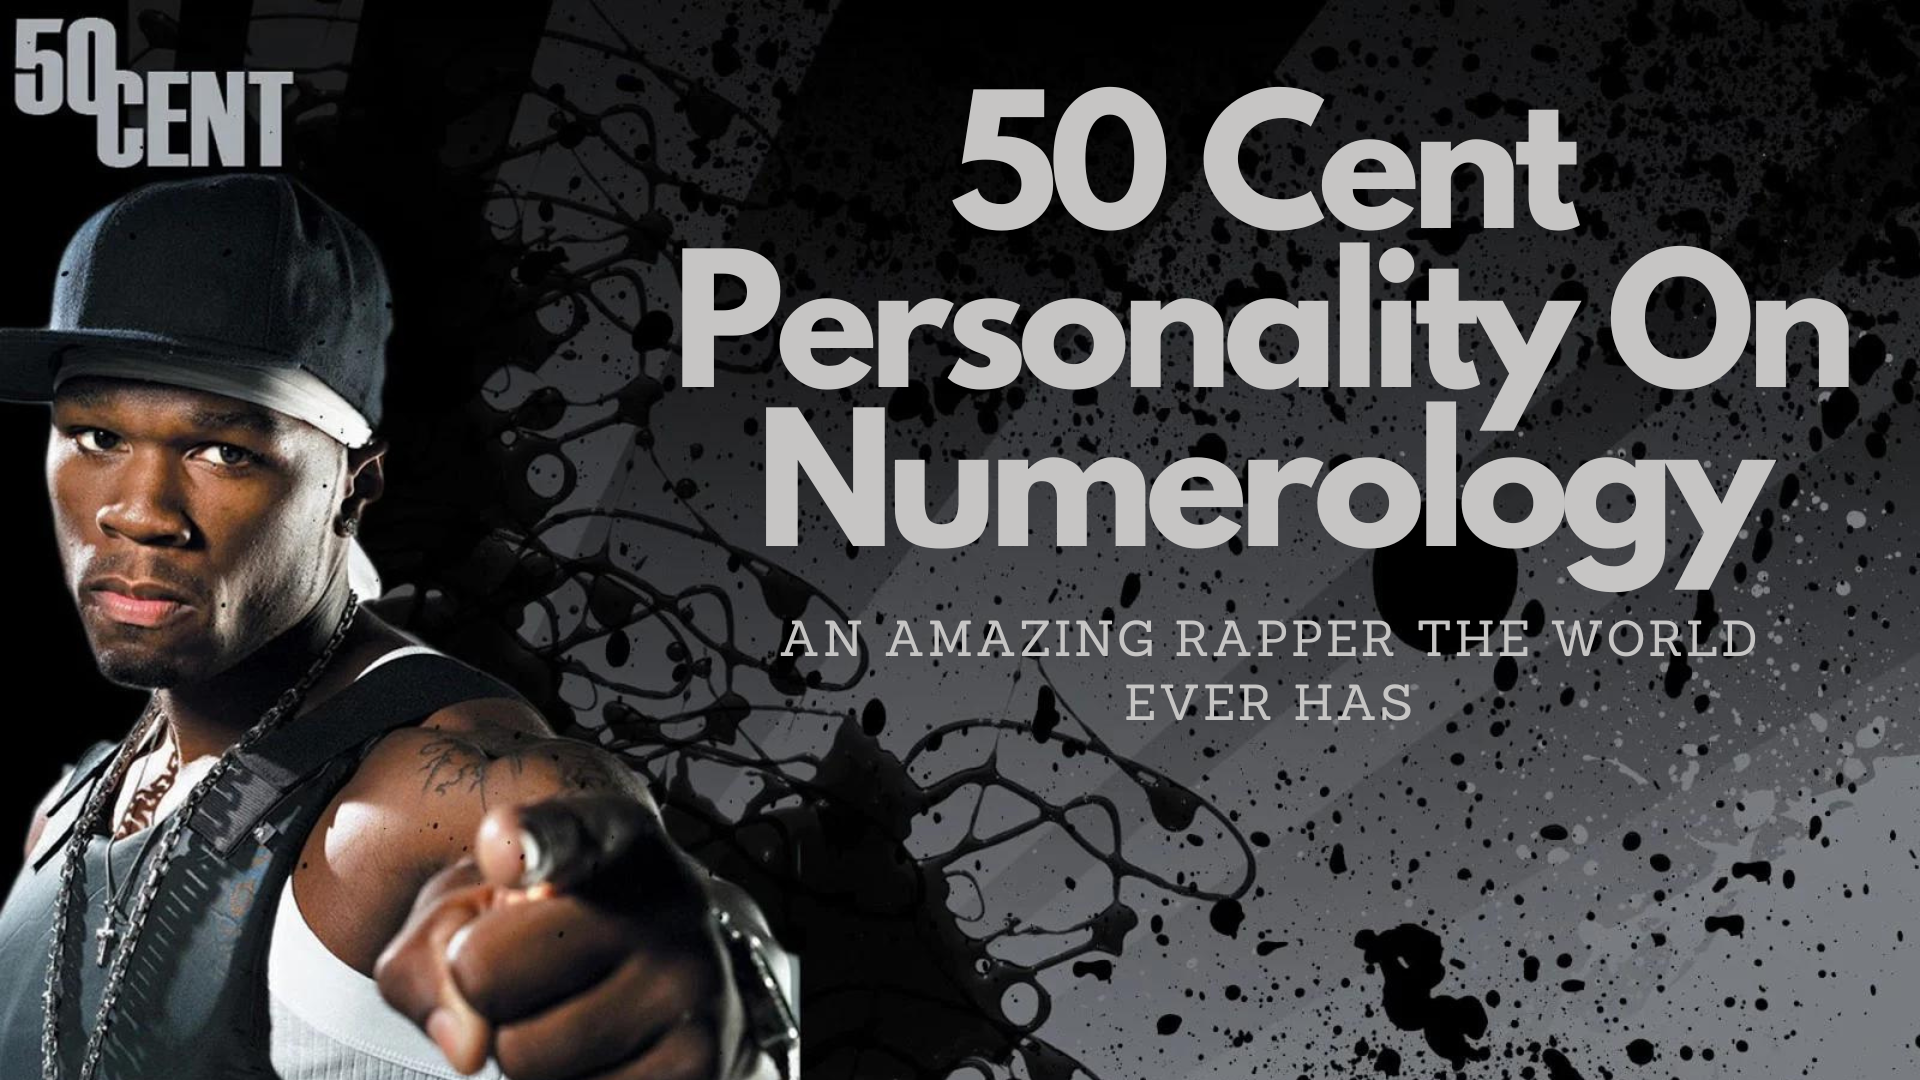 50 Cent Personality On Numerology -  An Amazing Rapper The World Ever Has